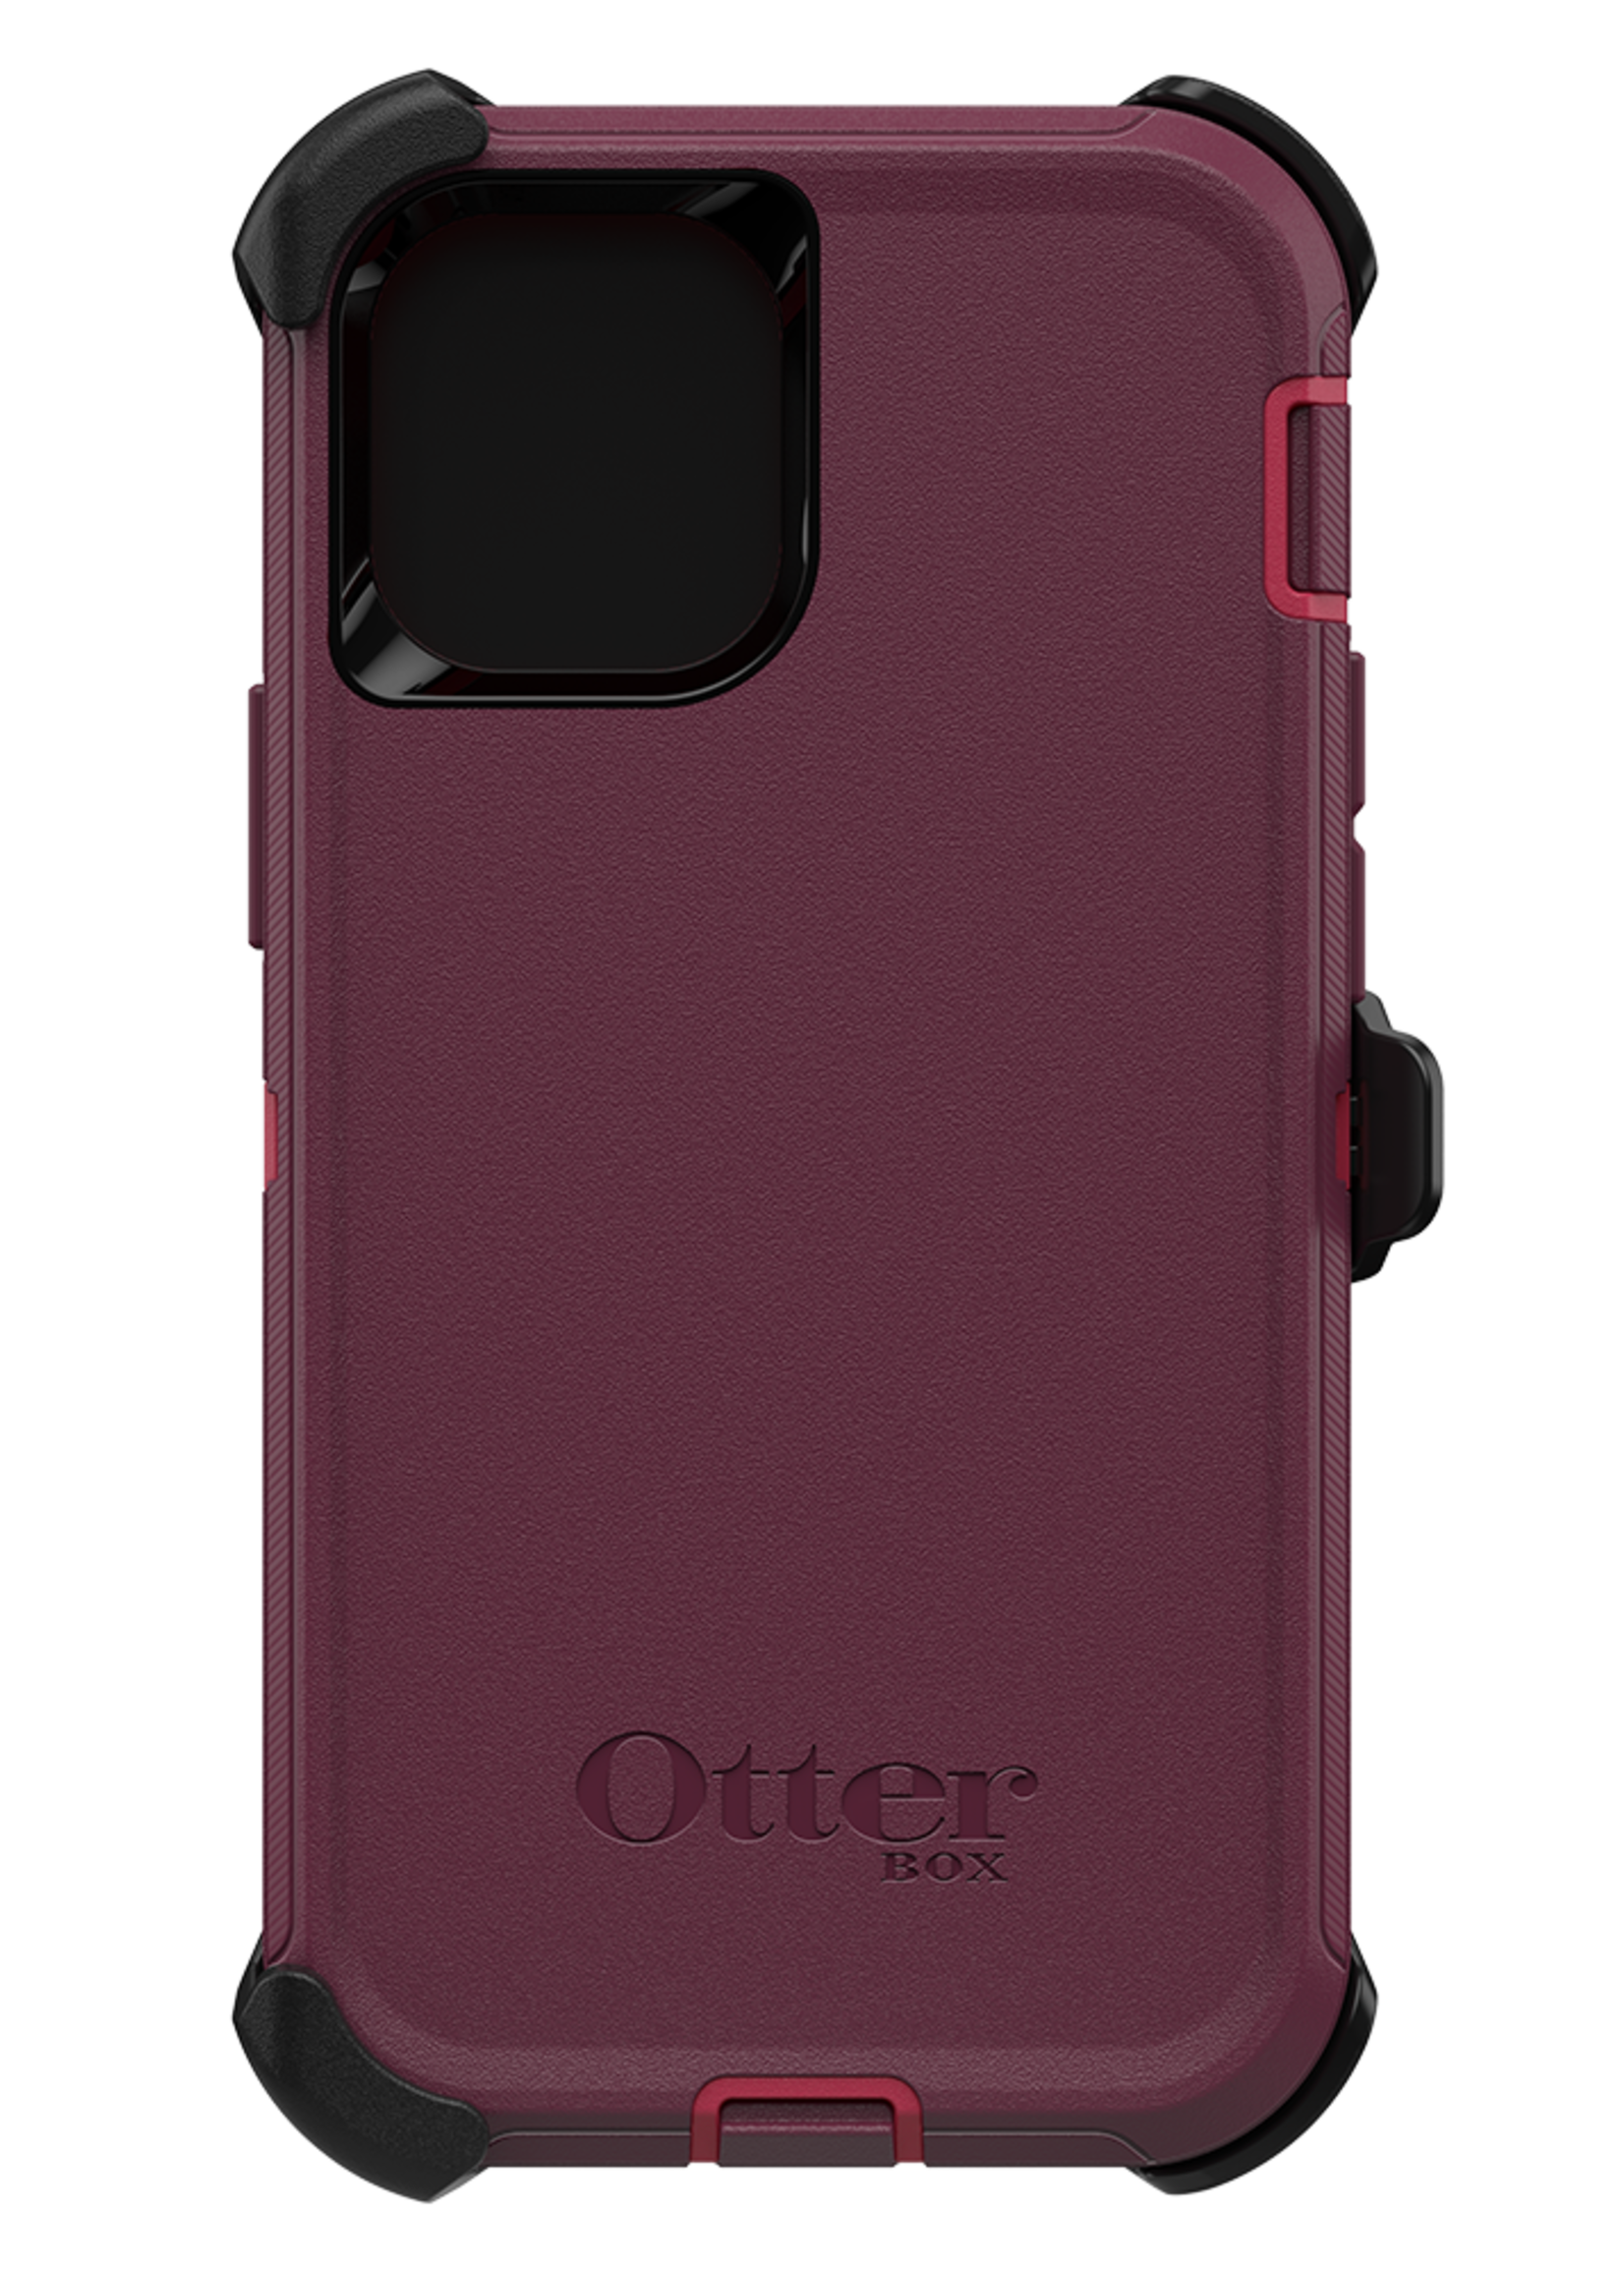 Otterbox OtterBox - Defender Case for Apple iPhone 12 mini - Berry Potion